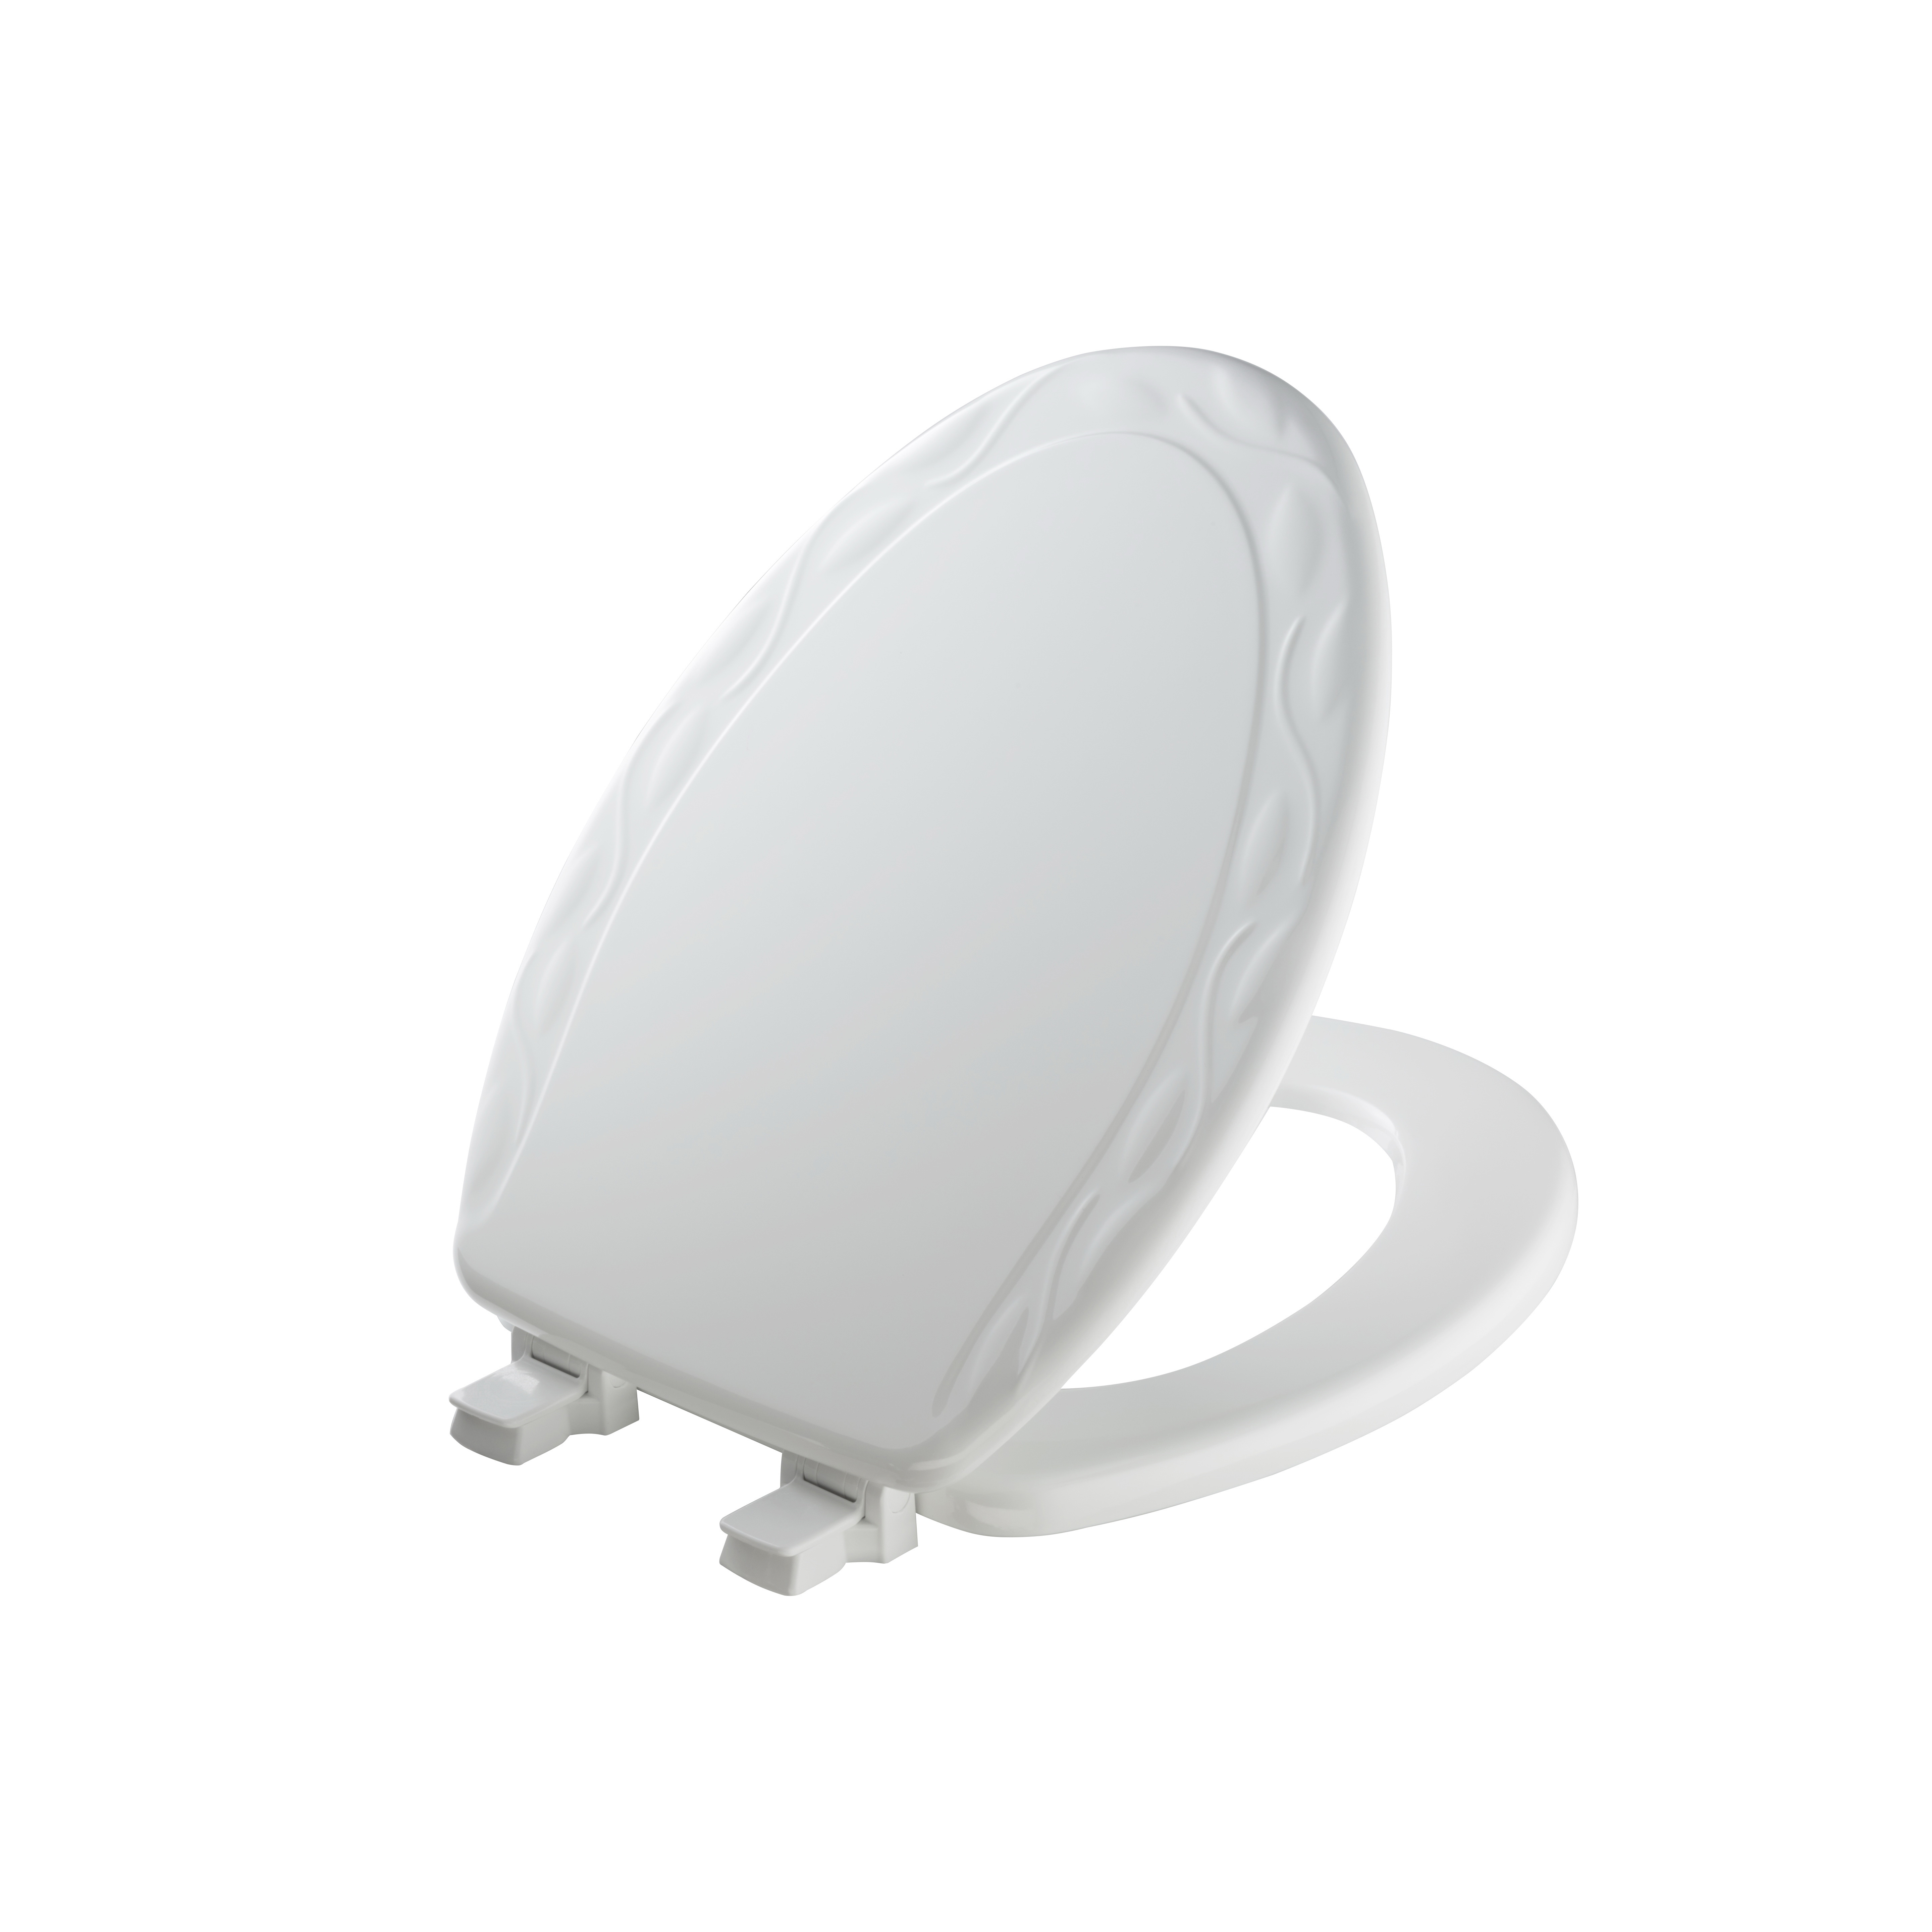 134EC 000 Toilet Seat, Elongated, Wood, White, Easy Clean and Change Hinge